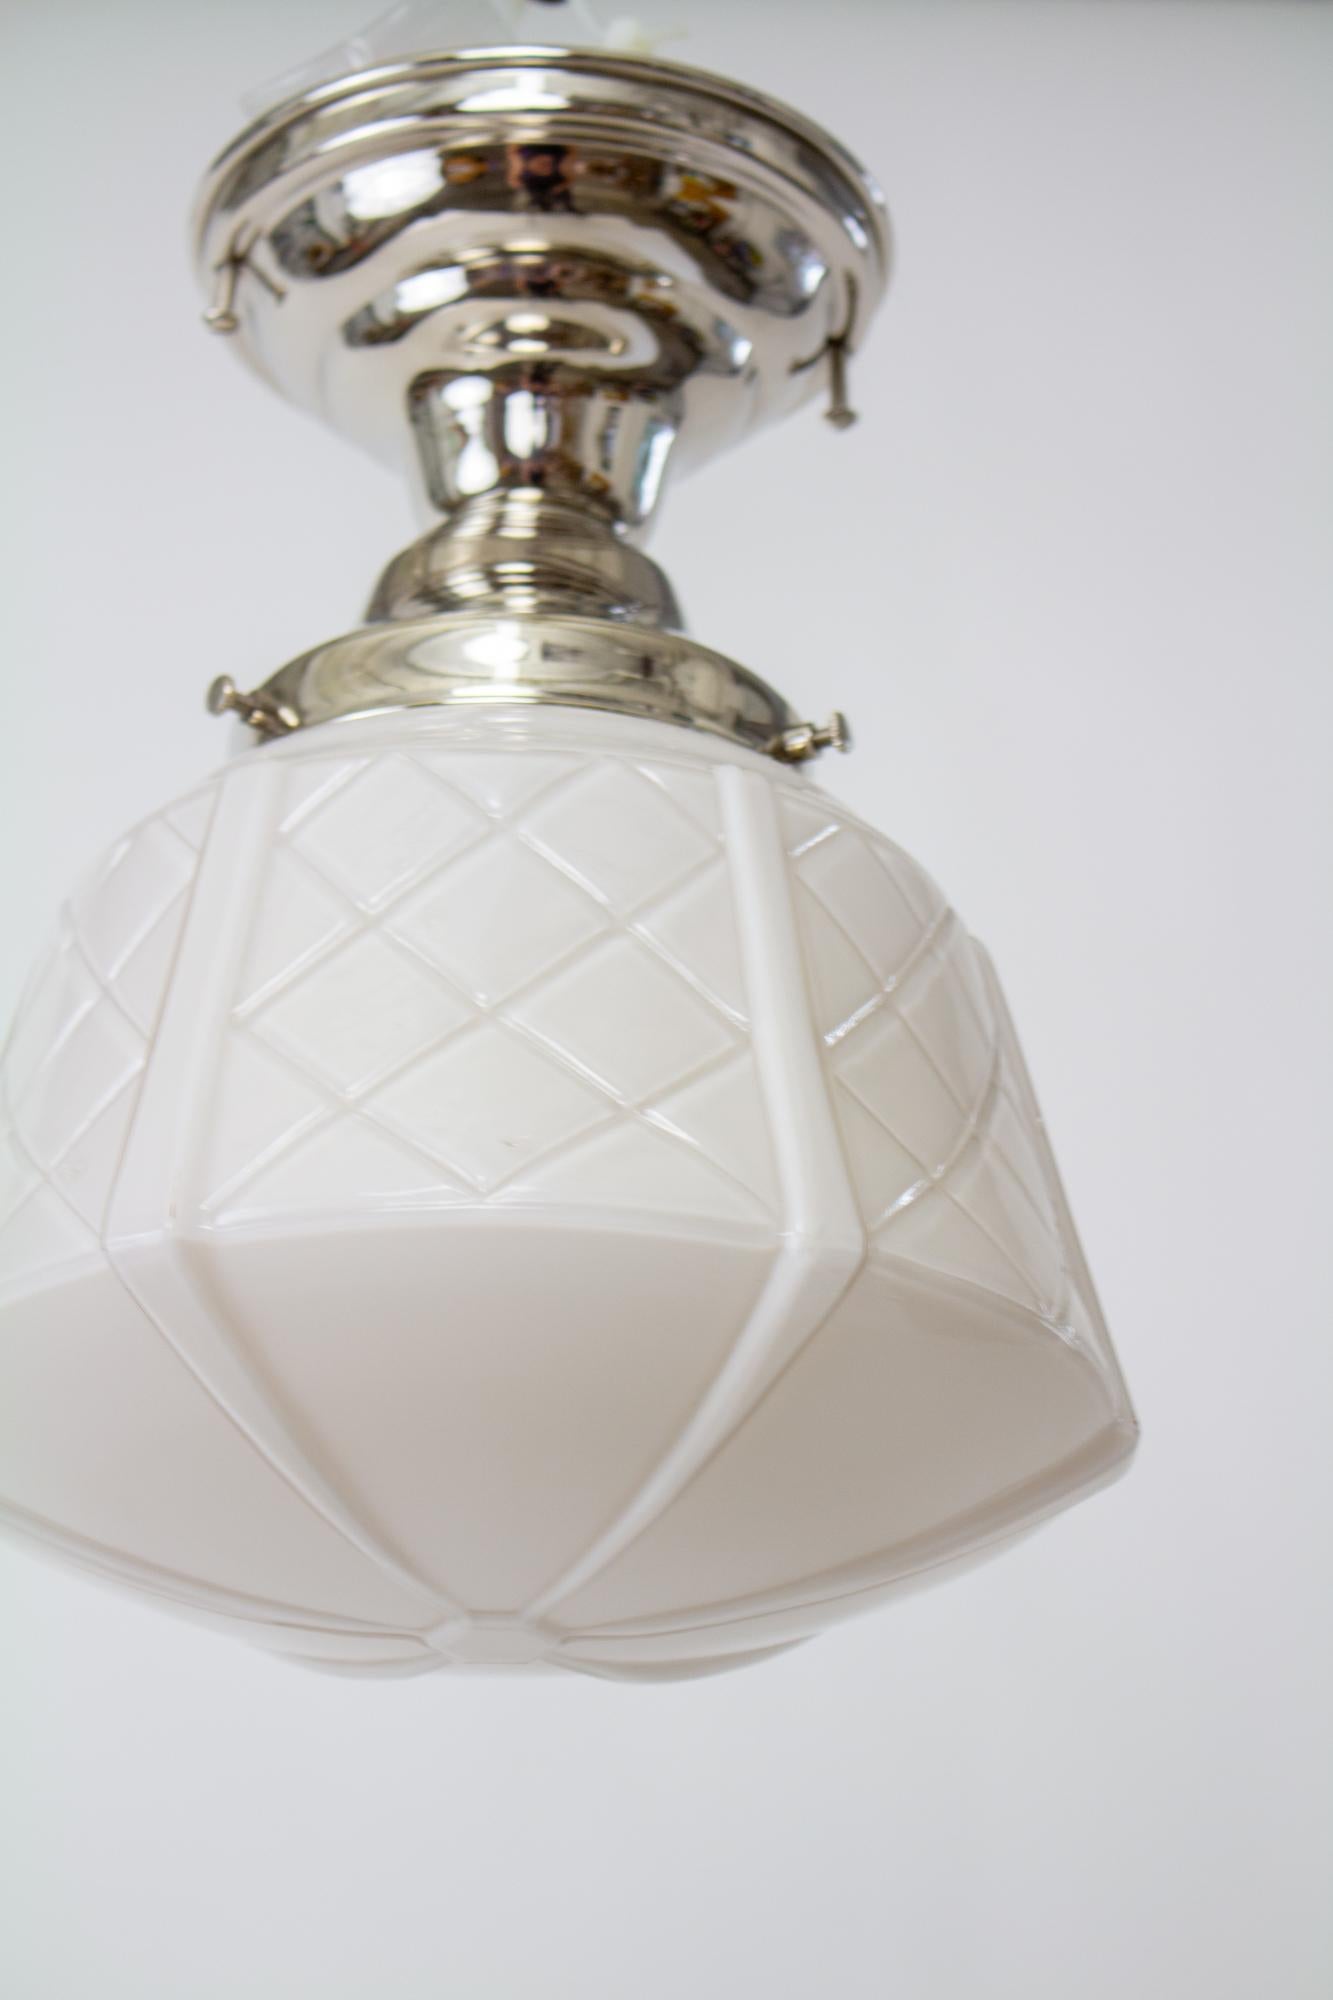 Flush mounted polished nickel Art Deco fixture with white cased glass. The glass shade has a criss-crossed shape and tapers to a wider shape at the bottom. C. 1930, American. The fixture is a new replacement, in polished nickel. It has a single